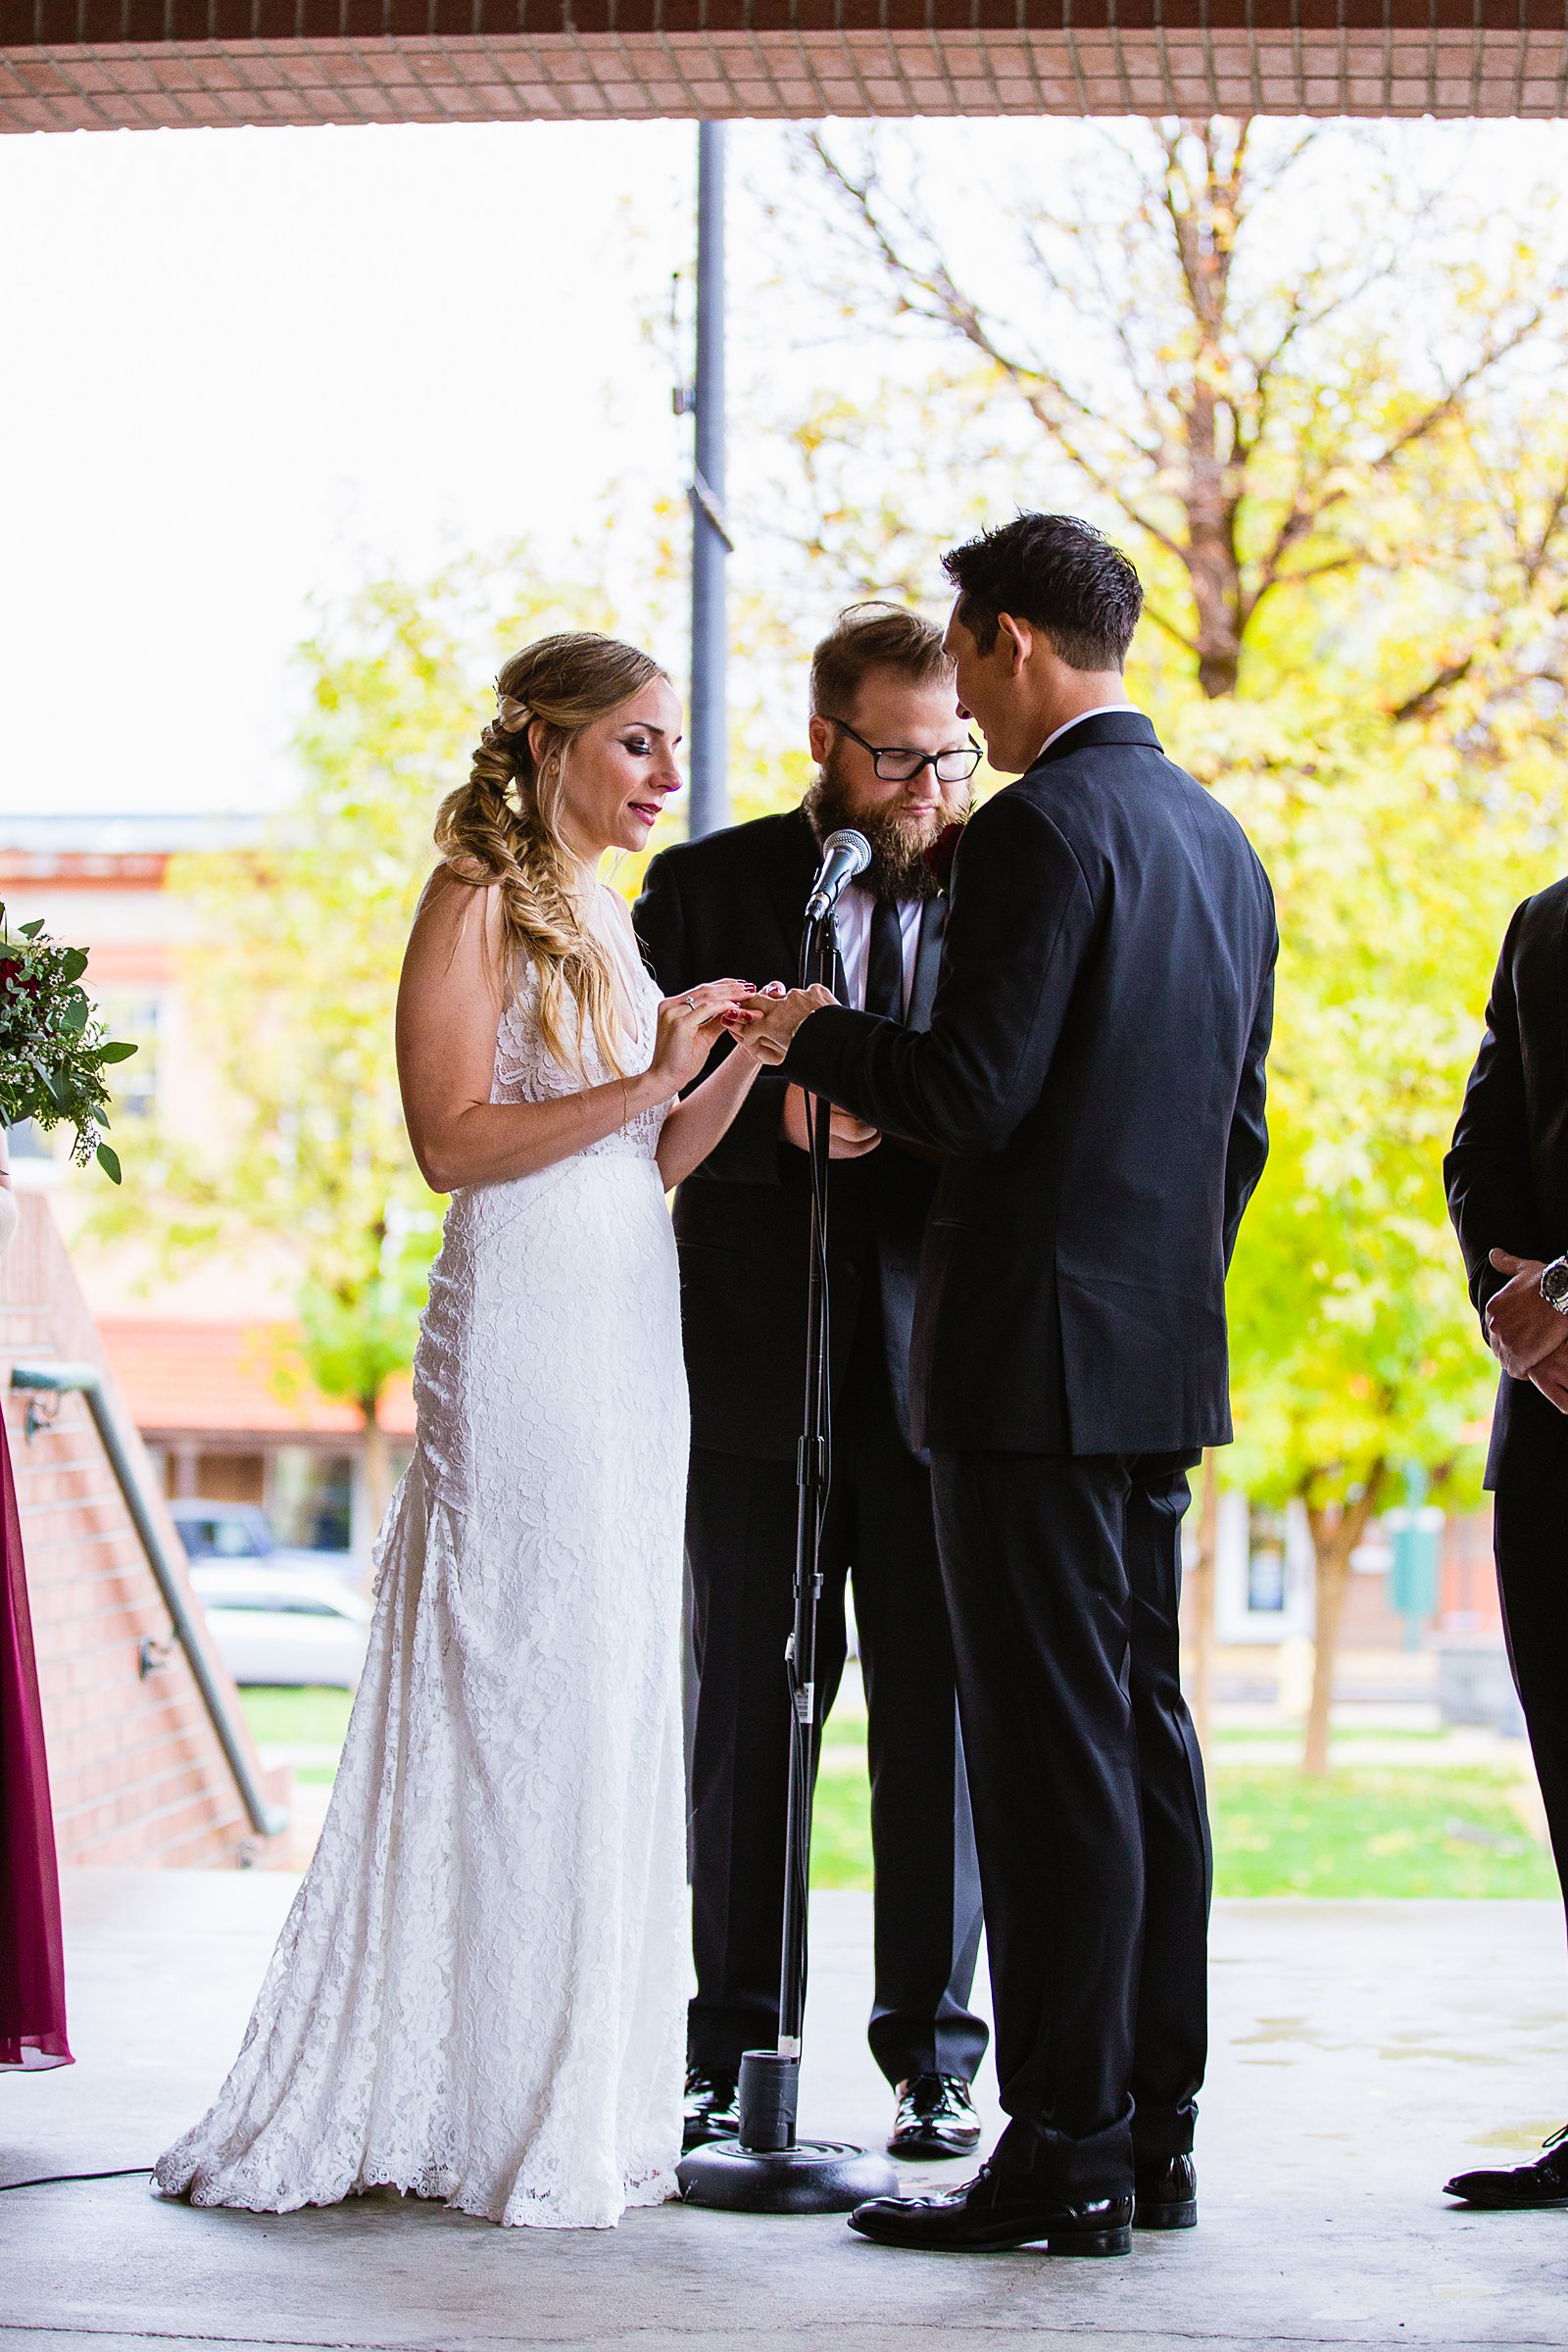 Bride and groom exchange rings during their wedding ceremony at downtown Flagstaff by Arizona wedding photographer PMA Photography.